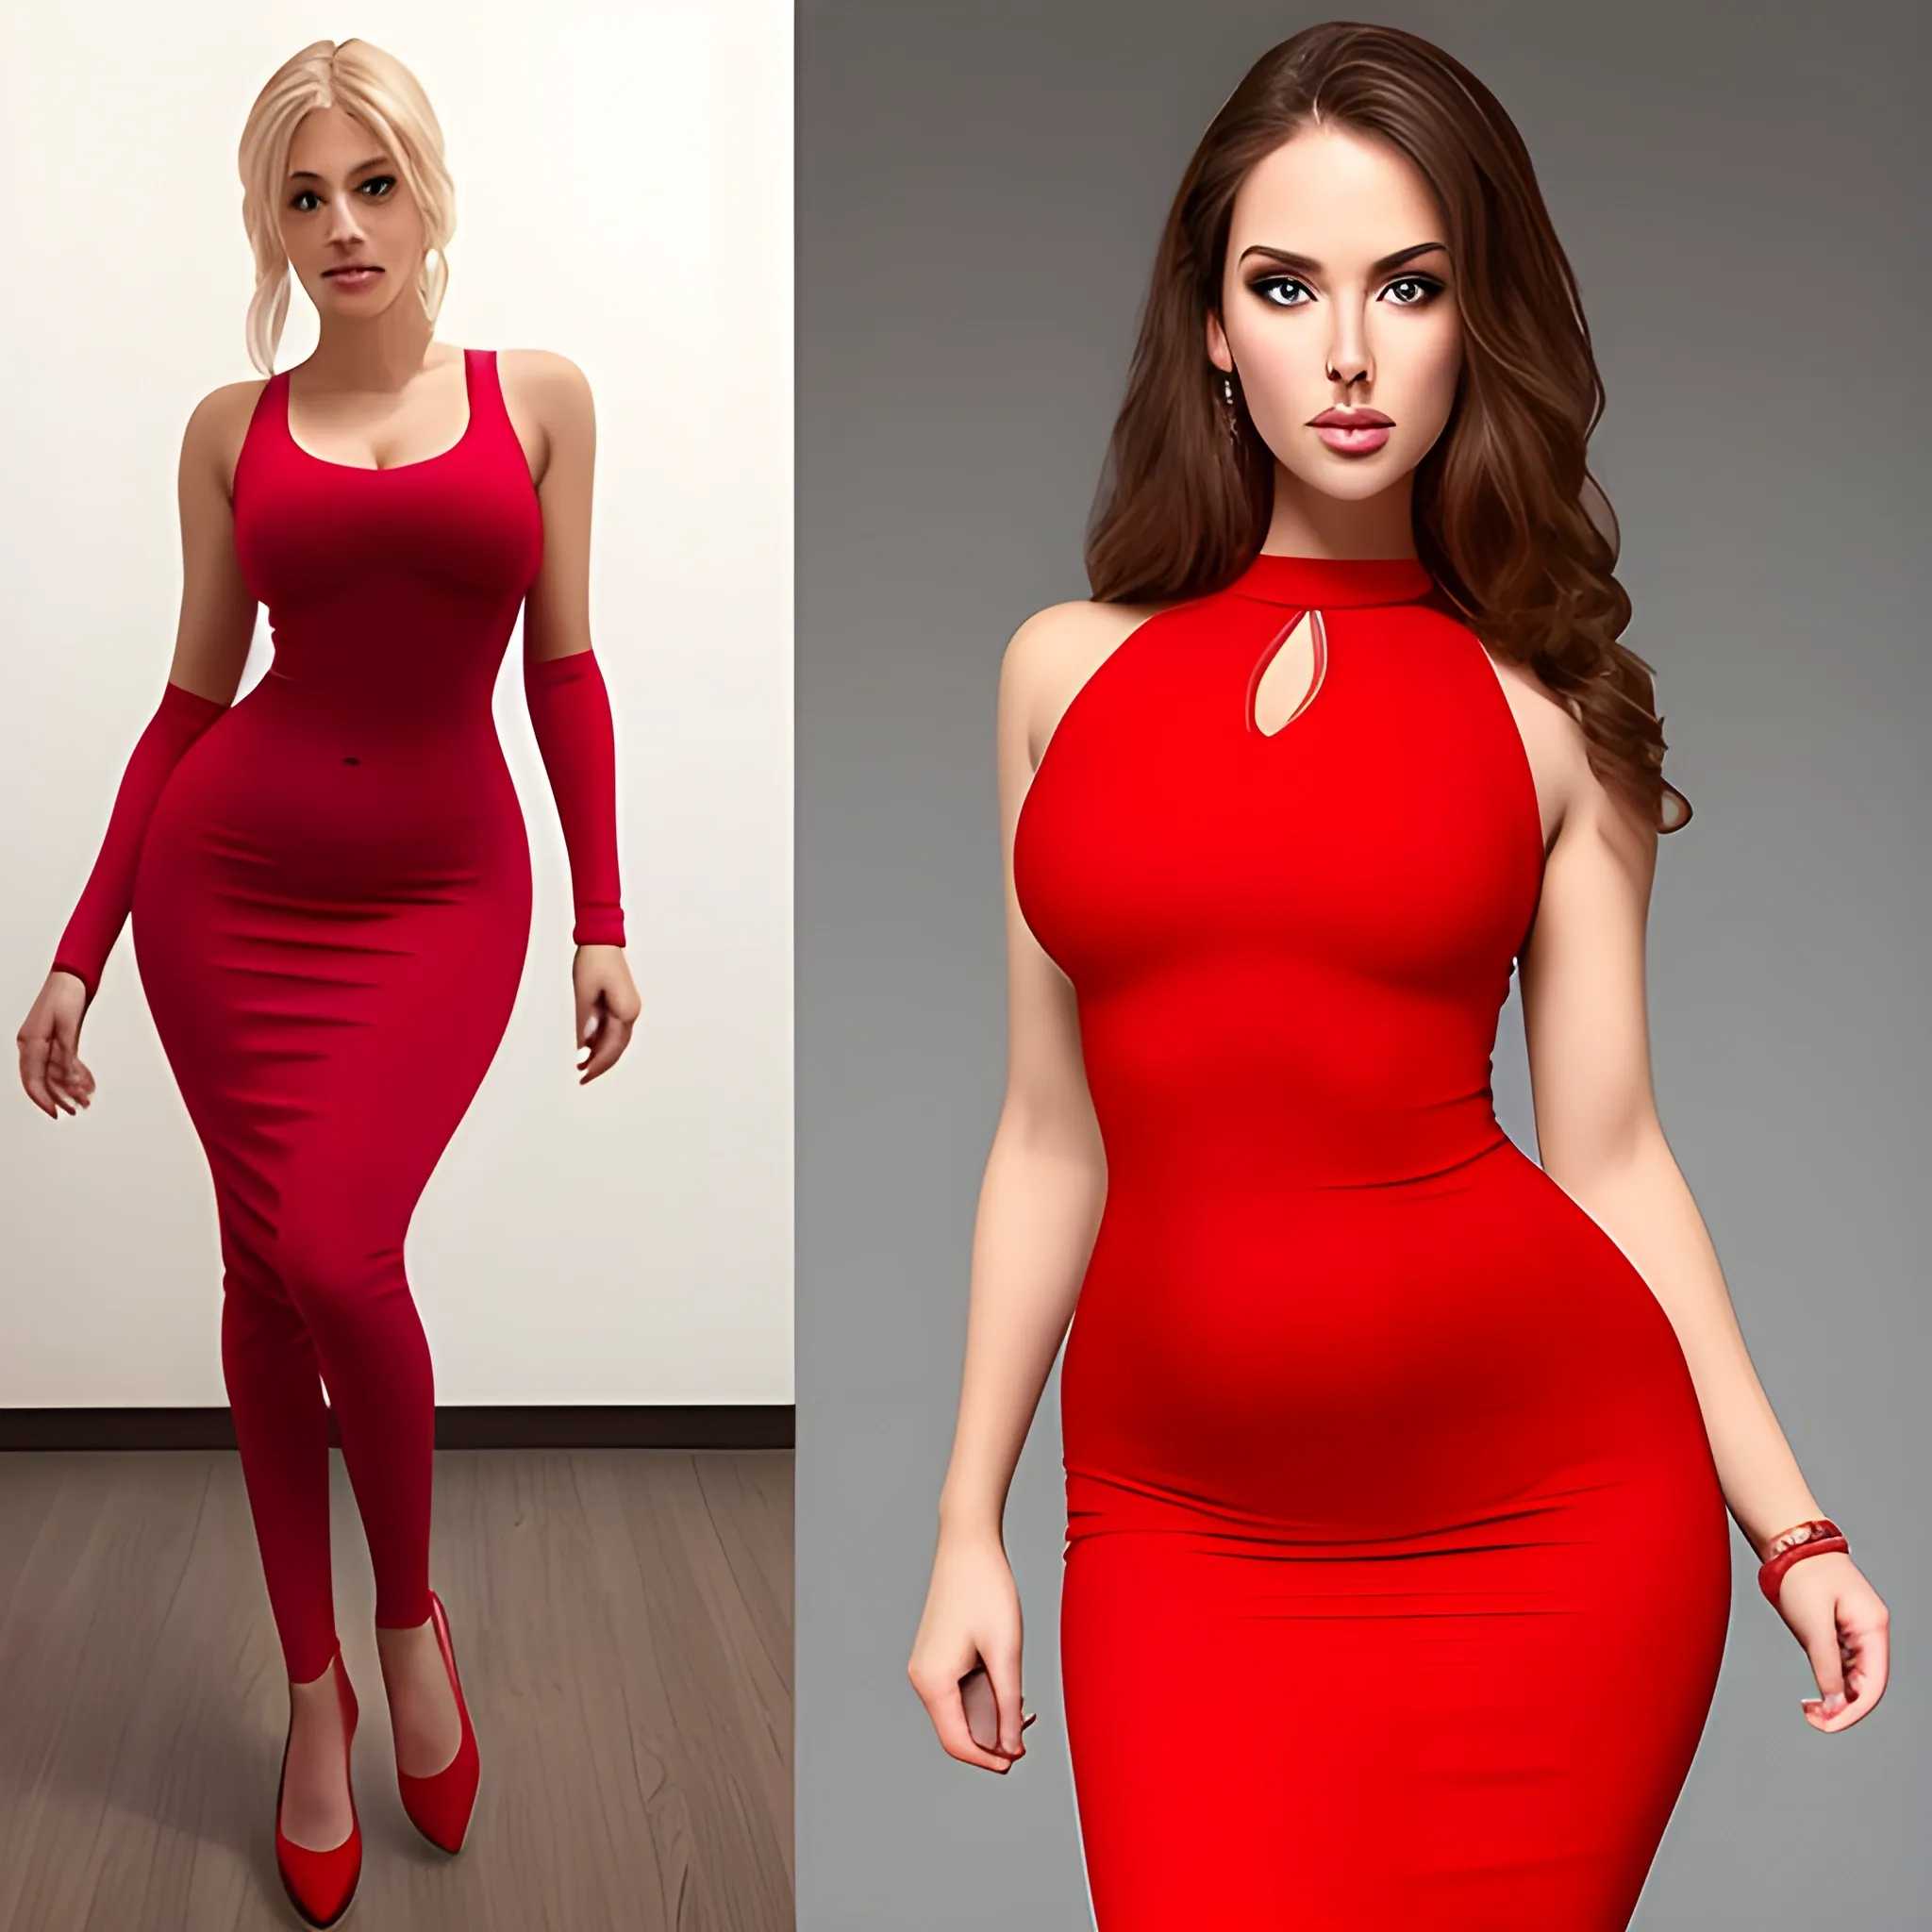 beautiful woman with an hourglass figure wearing a tight-fitting 